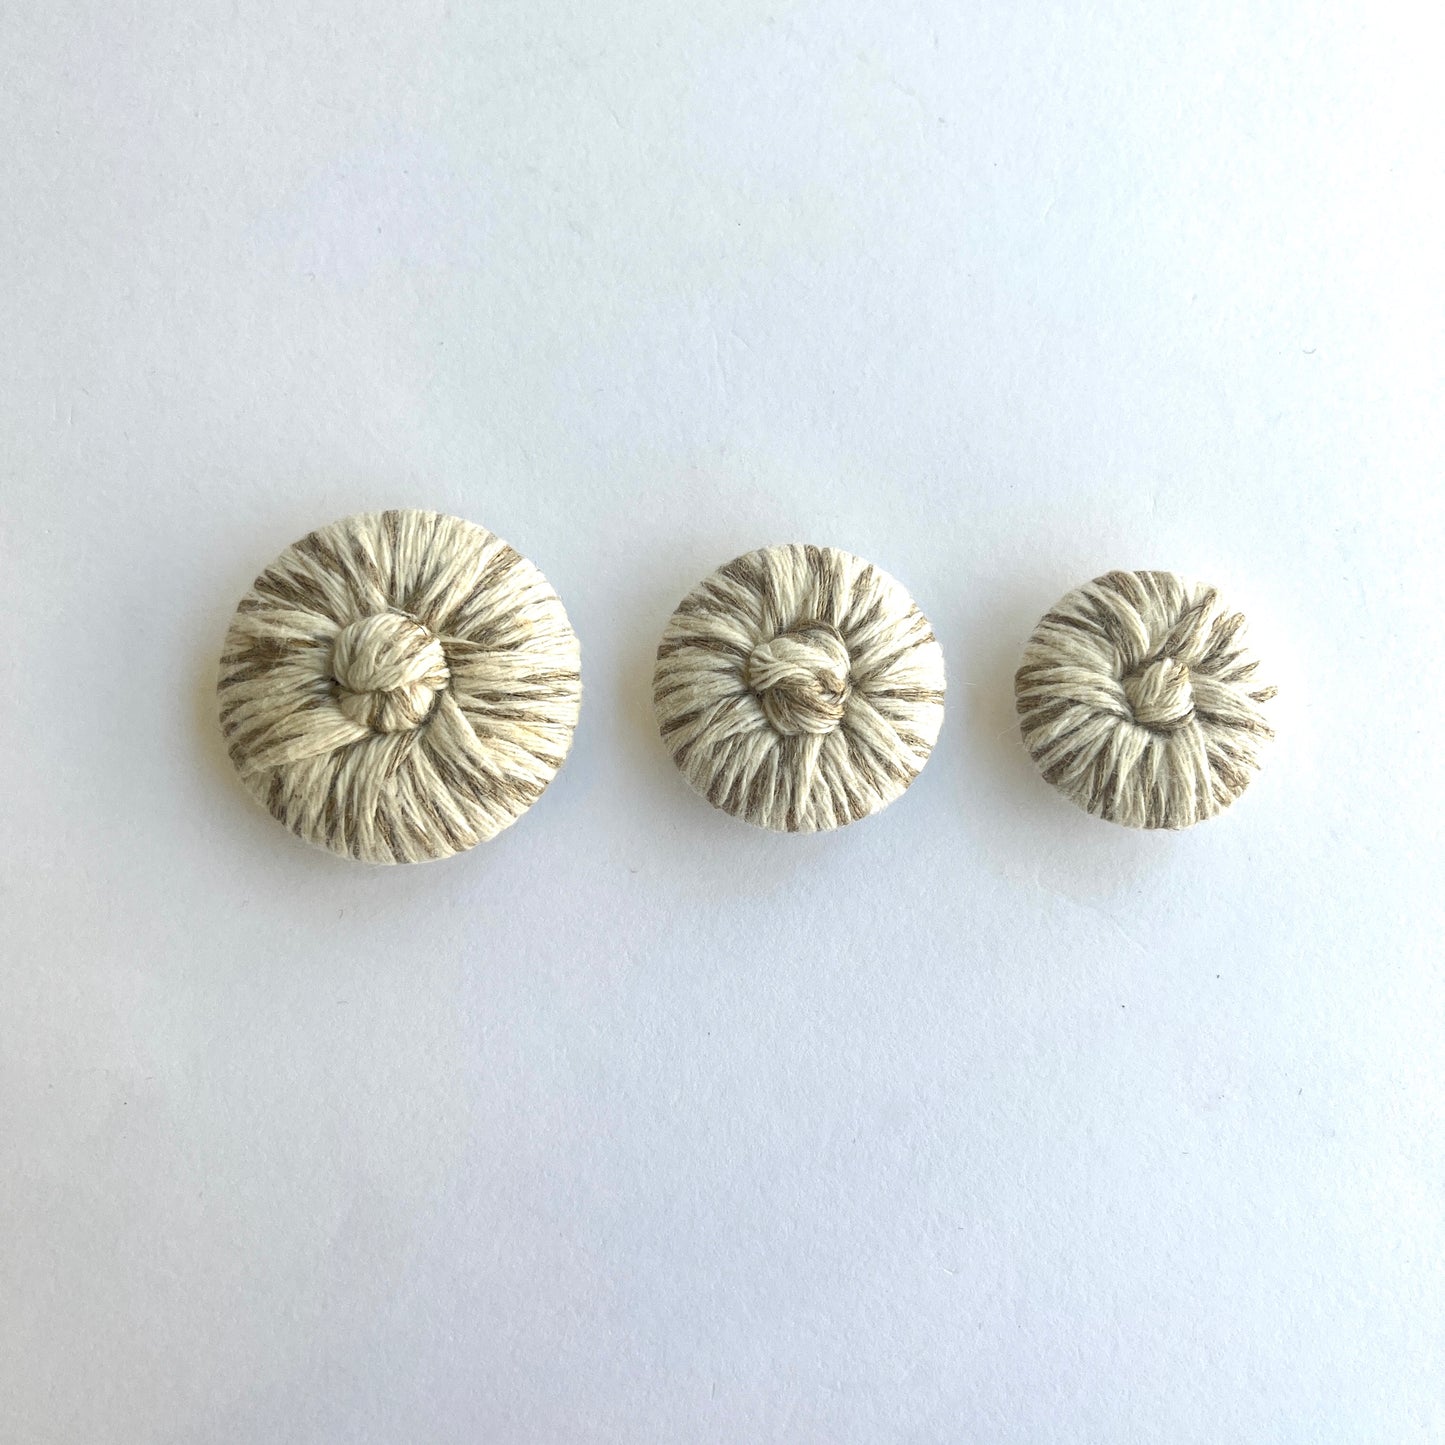 statement button, 2.3cm button, 1" button. brown jacket button, corded button with knitted centres in large sizes. soutache cord button, passementarie buttons, 1980s button, 1940s button Vintage button. Natural colour button, ivory, stone, beige, string colour button available in 3 sizes